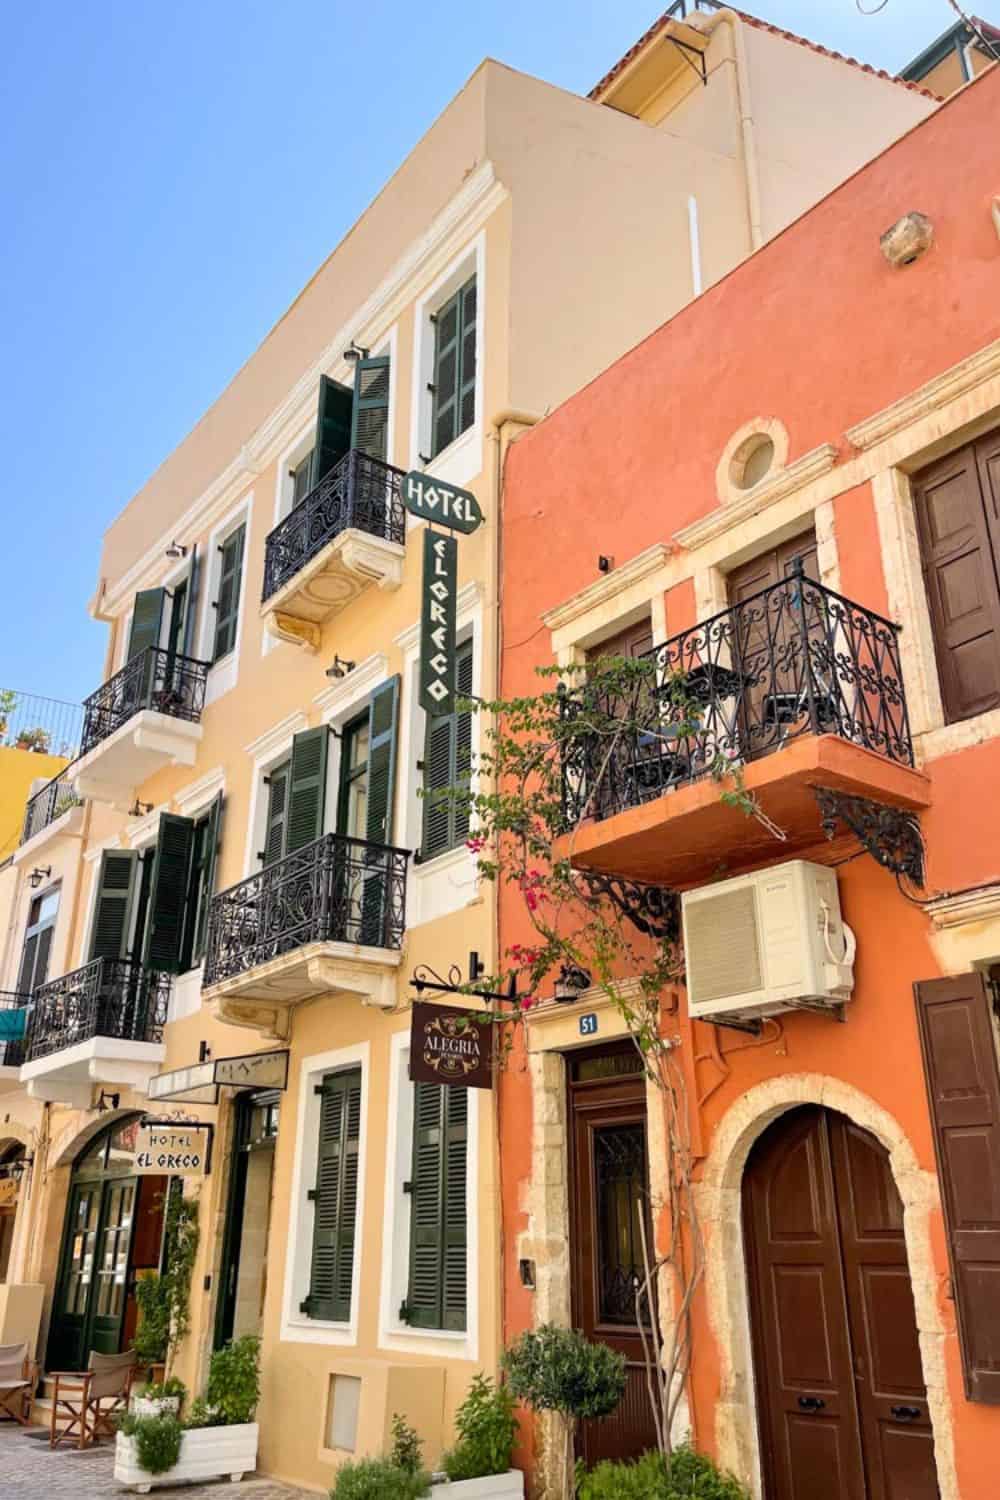 Colorful facades of Chania's old town buildings, with a view of the Hotel El Greco and Alegria signages, showcasing Greek architecture